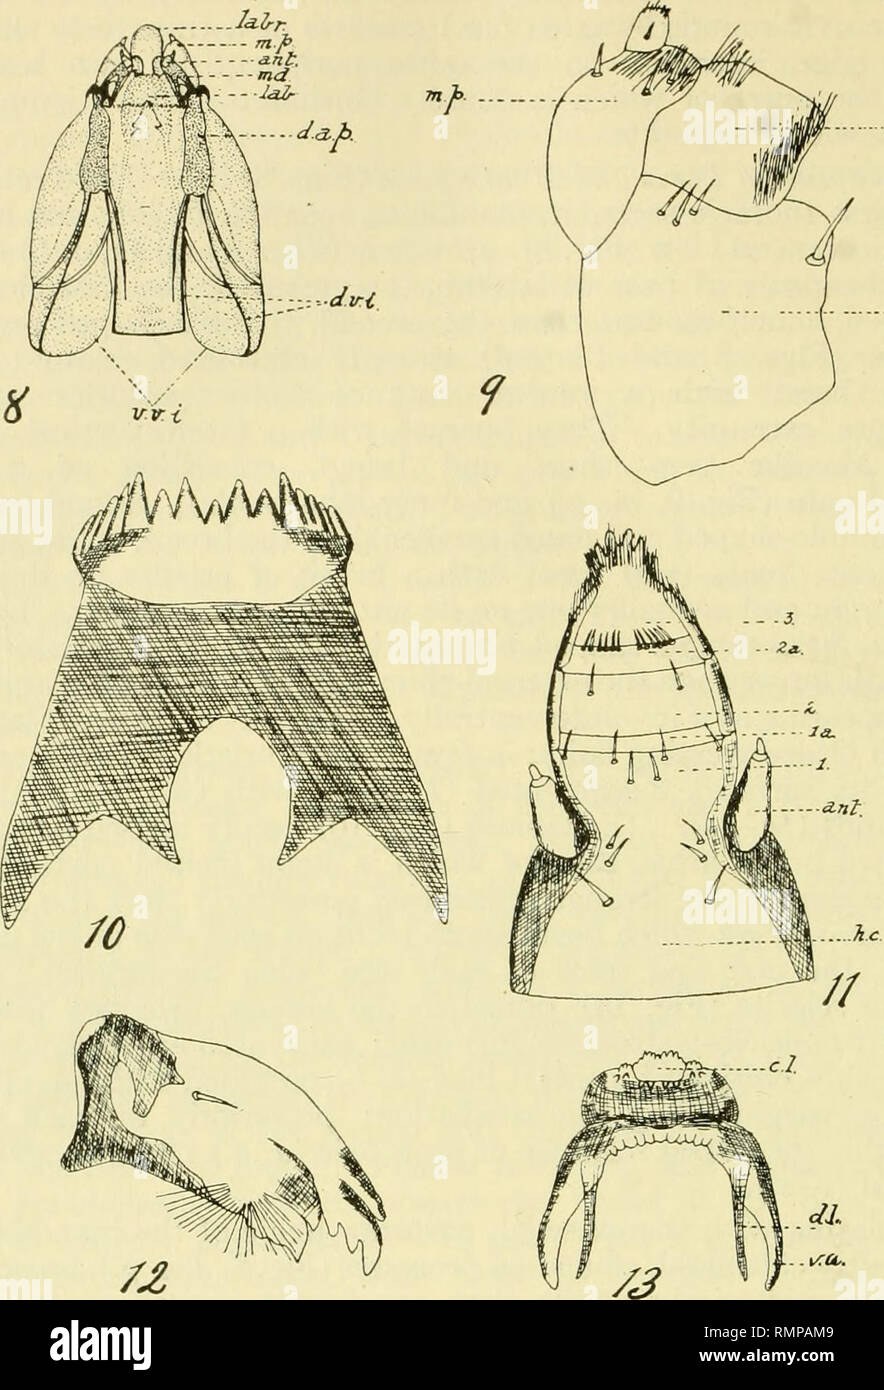 . Annals of the Entomological Society of America. Entomology. 84 Annals Entomological Society of America [Vol. XI,. Explanation of Figures. Fig. 8. Head-capsule of larva. Labr., labrum; m. p., maxillary palp; ant., antenna; md., mandible; lab., labrum; d. a. p., dorsal articulating process; d. v. i.^ dorsal V-shaped incision; v. v. i., ventral V-shaped incision. X 30. Fig. 9. Maxilla of larva; m. p., maxillary palp; ma., mala; ca., cardo. Camera lucida drawing. X 115. Fig. 10. Labium of larva. Camera lucida drawing. X 160. Fig. 11. Labrum of larva; 1, 2, 3, number of segments; la, 2a, interseg Stock Photo